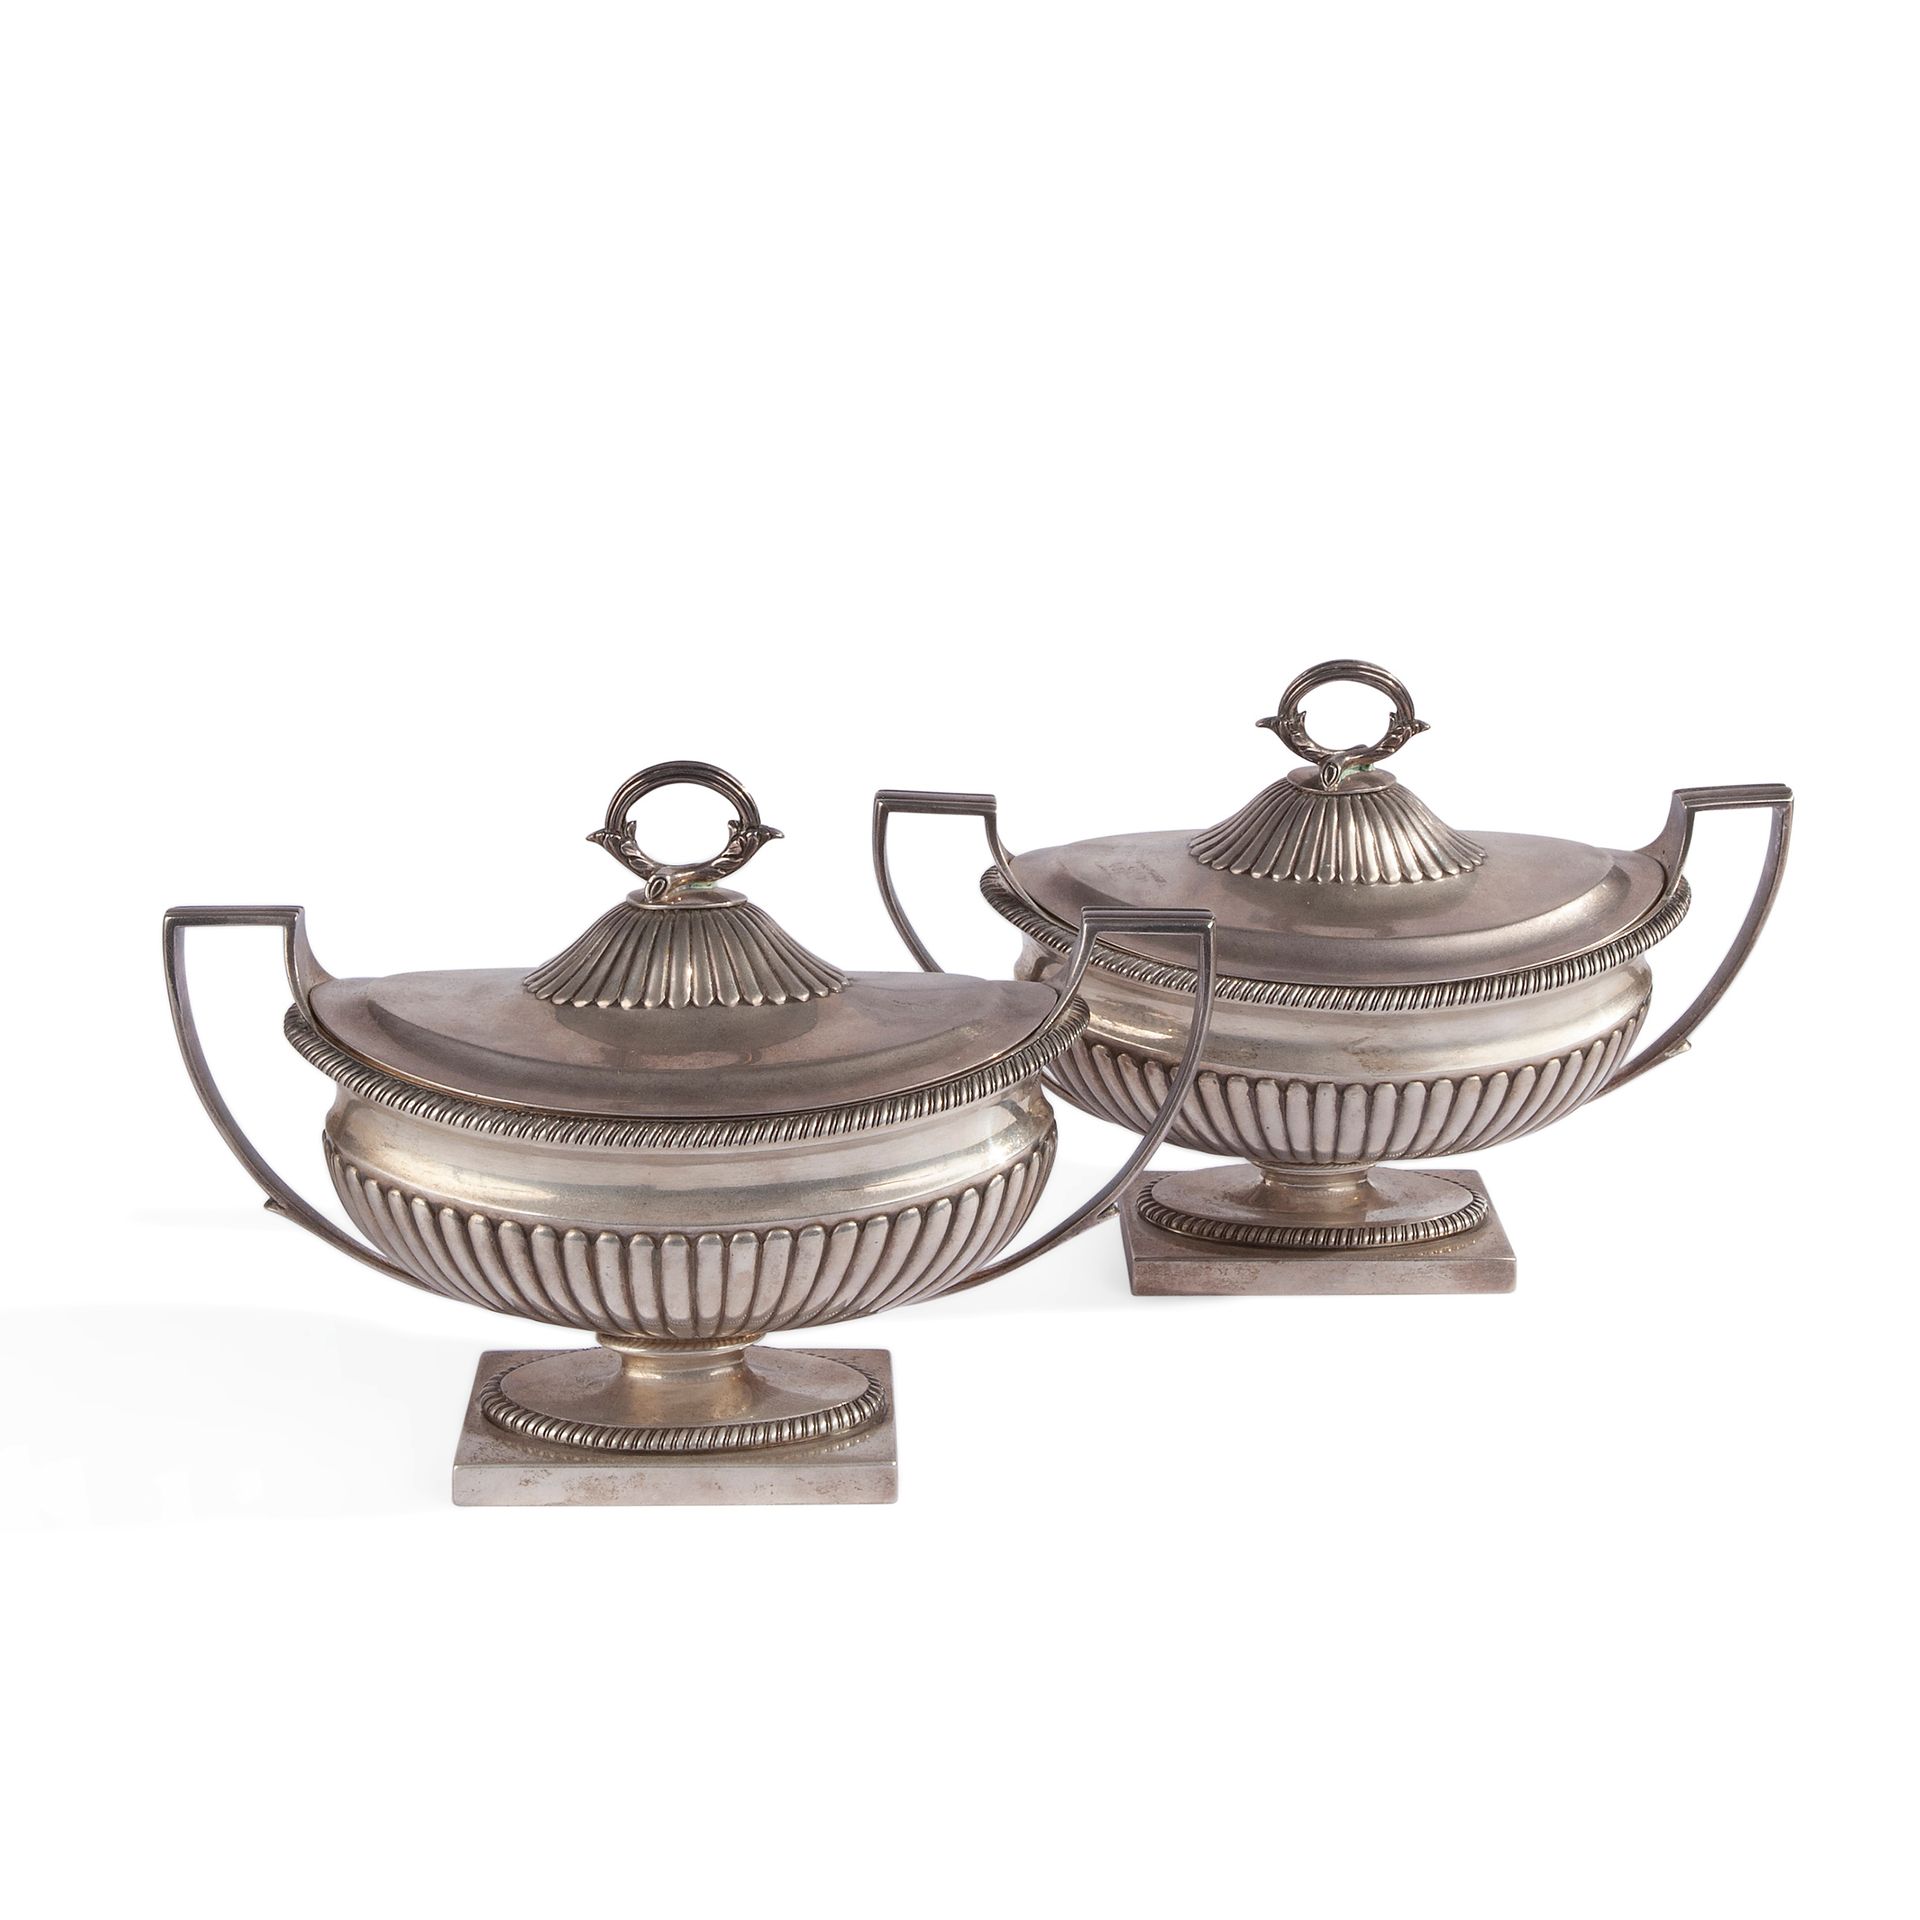 Pair of silver sauce boats, London 1803 George III period Total weight 51.3 oz.,&hellip;